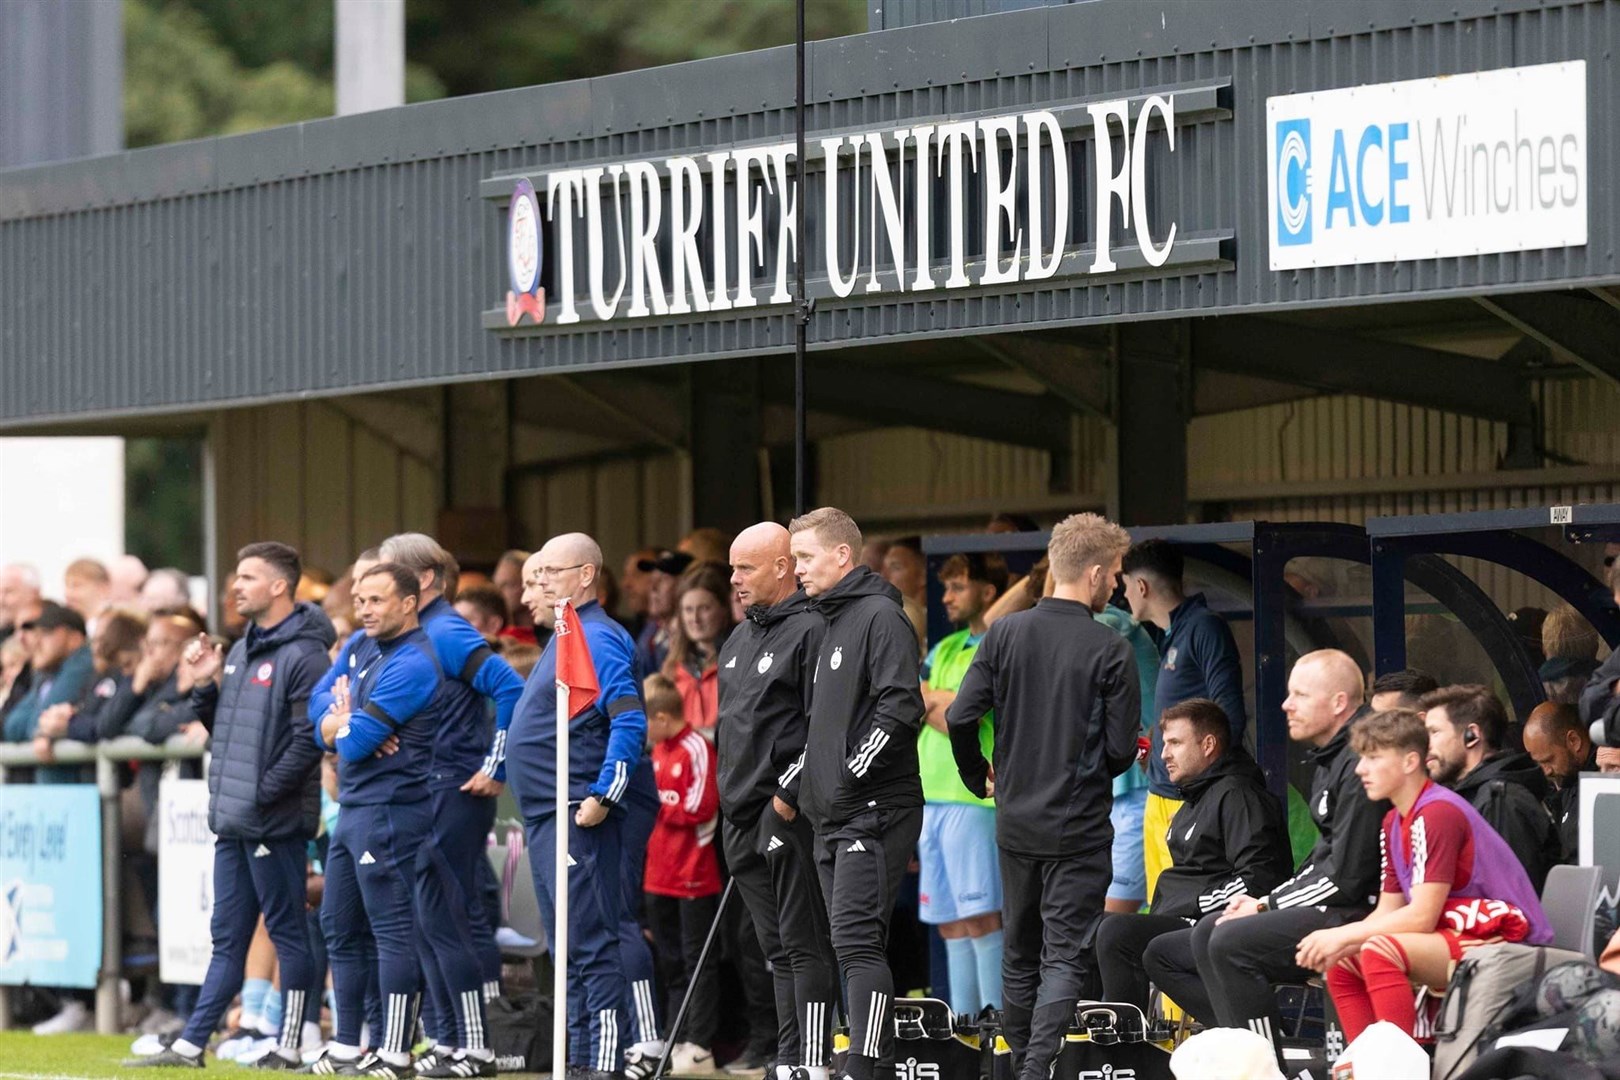 Aberdeen took on Turriff United in pre-season at The Haughs.